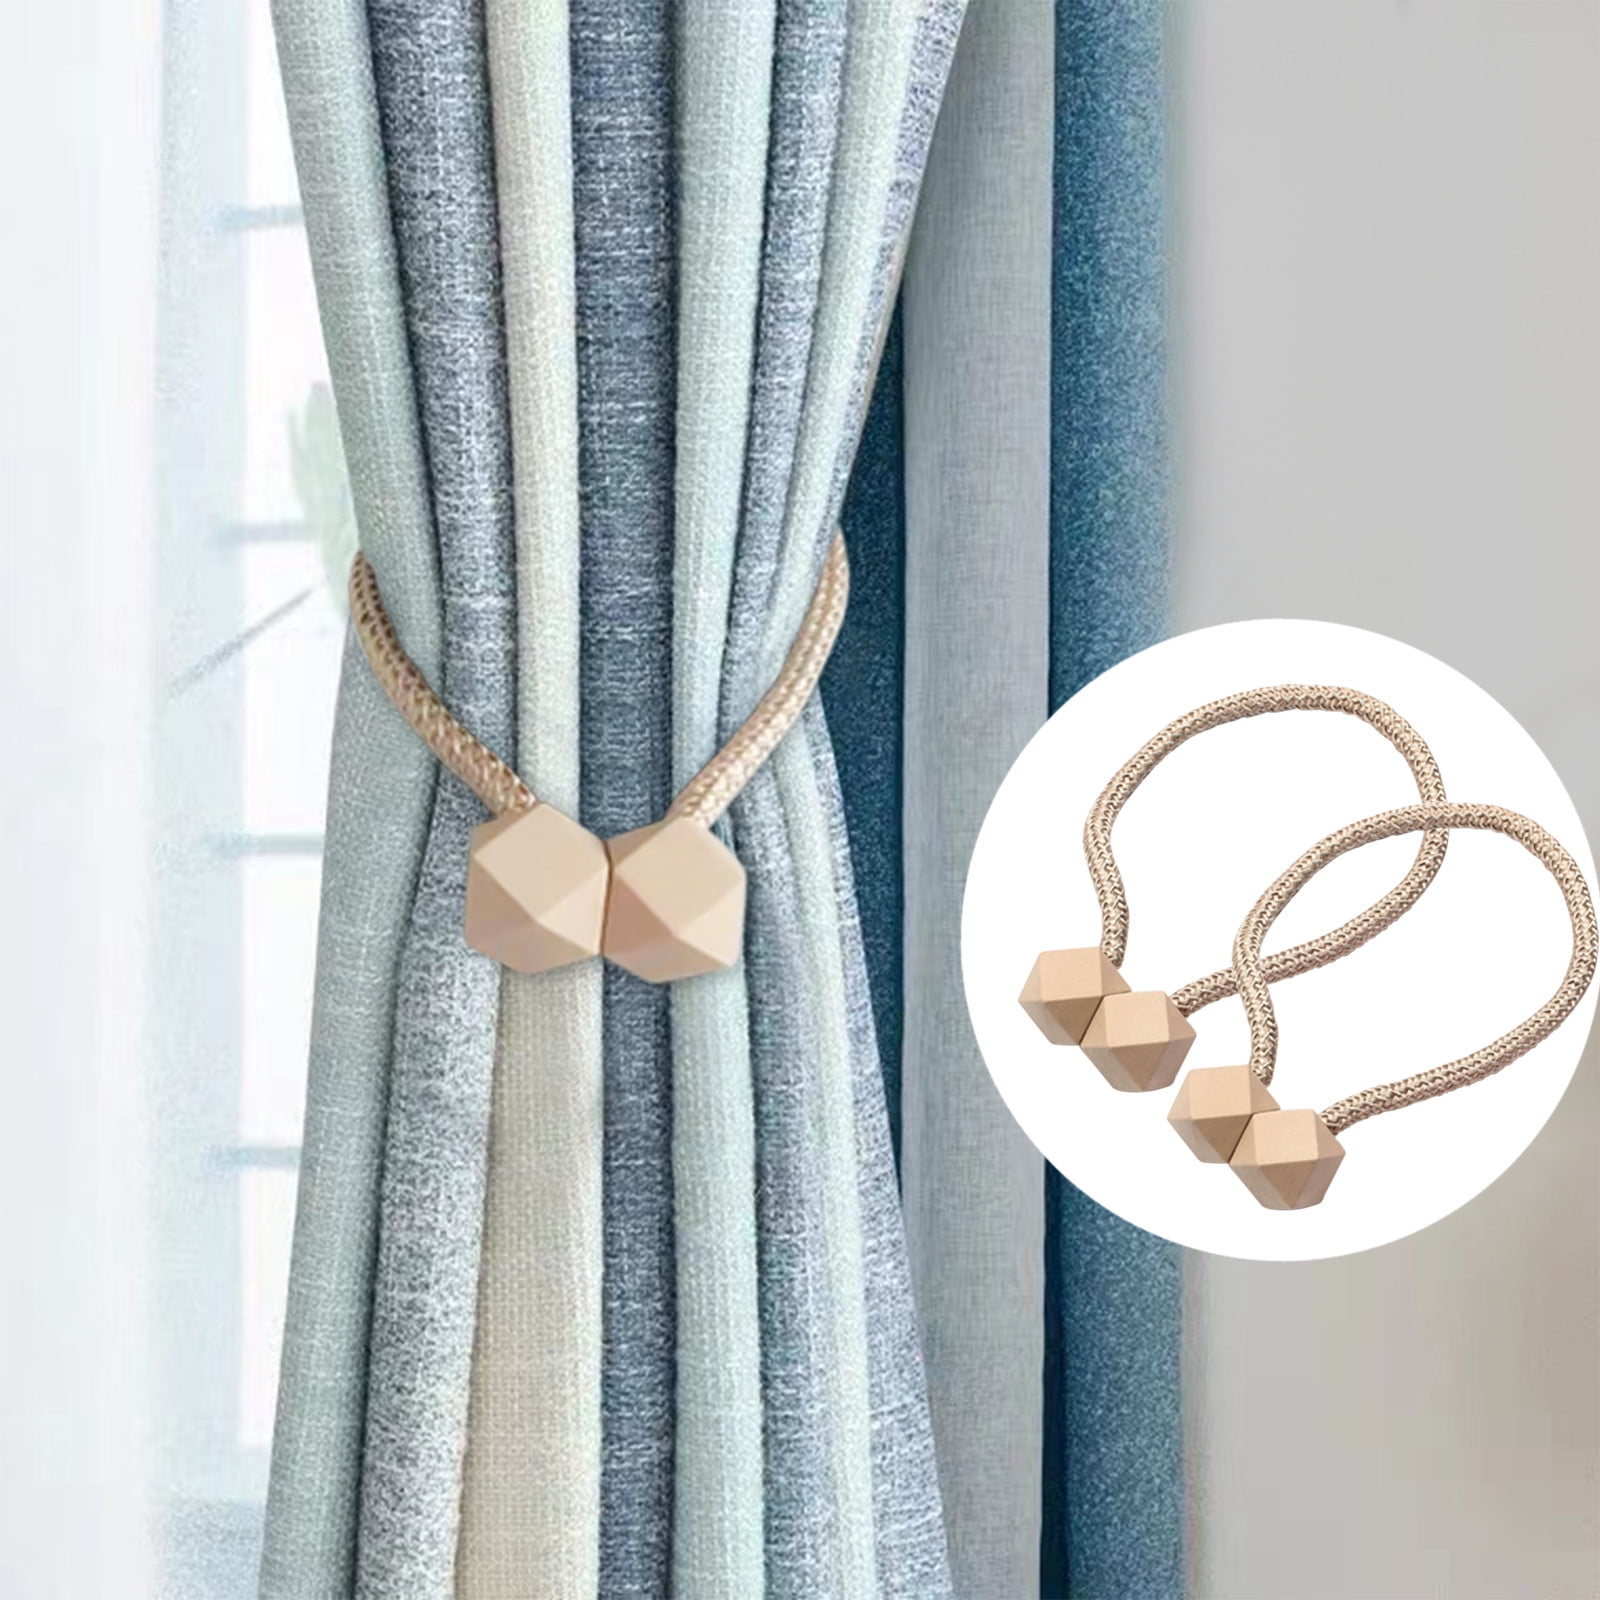 Details about   2X Handmade Curtain Cotton Rope Tie Backs Ball Tiebacks Curtains Home Decor DIY 